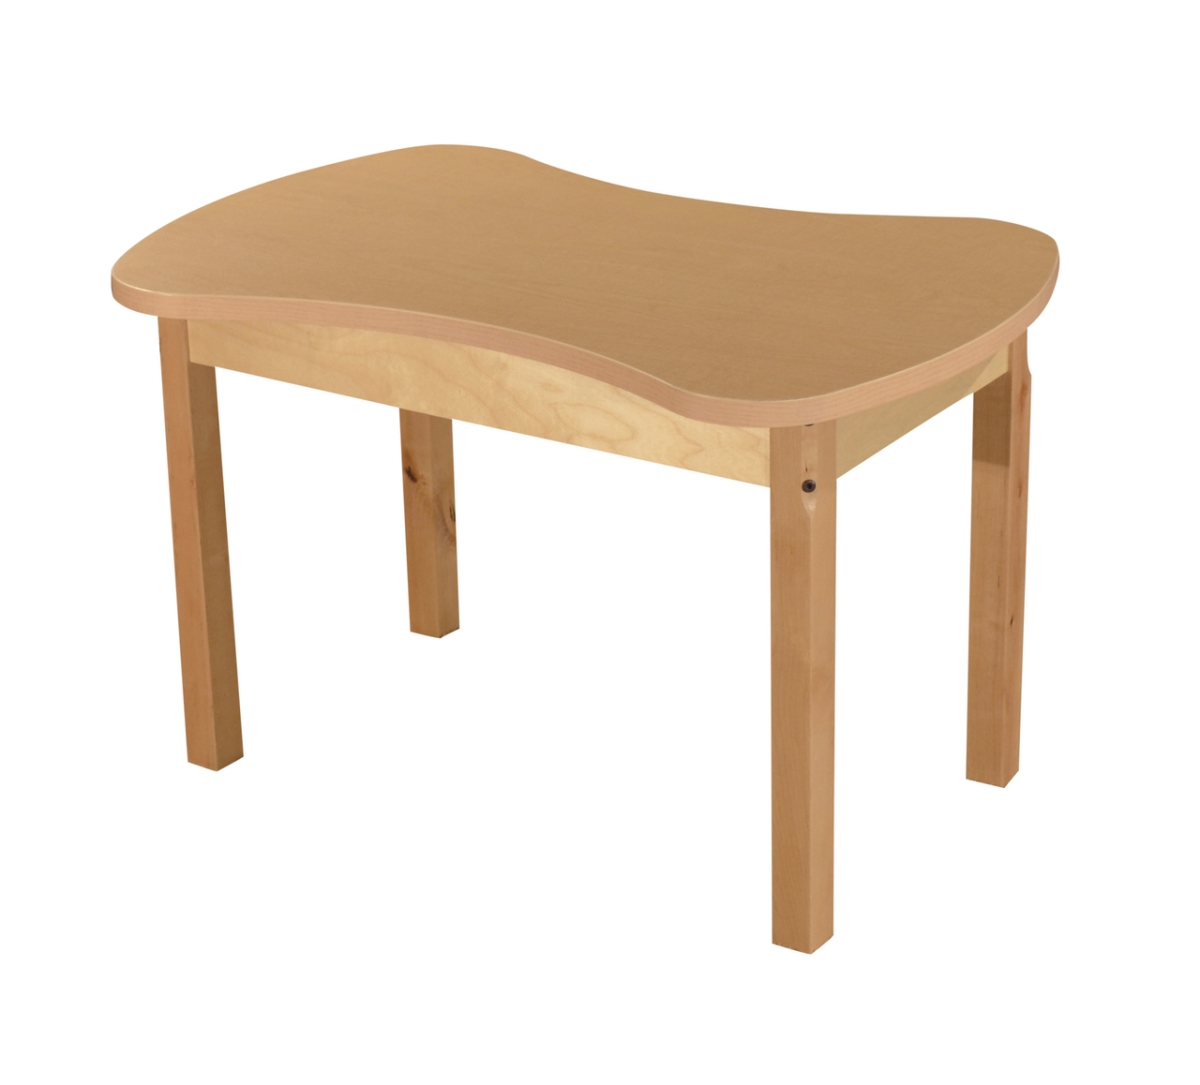 Picture of Wood Designs HPL2436C18 24 x 36 in. Synergy Junction, High Pressure Laminate Table with Hardwood Legs- 18 in.